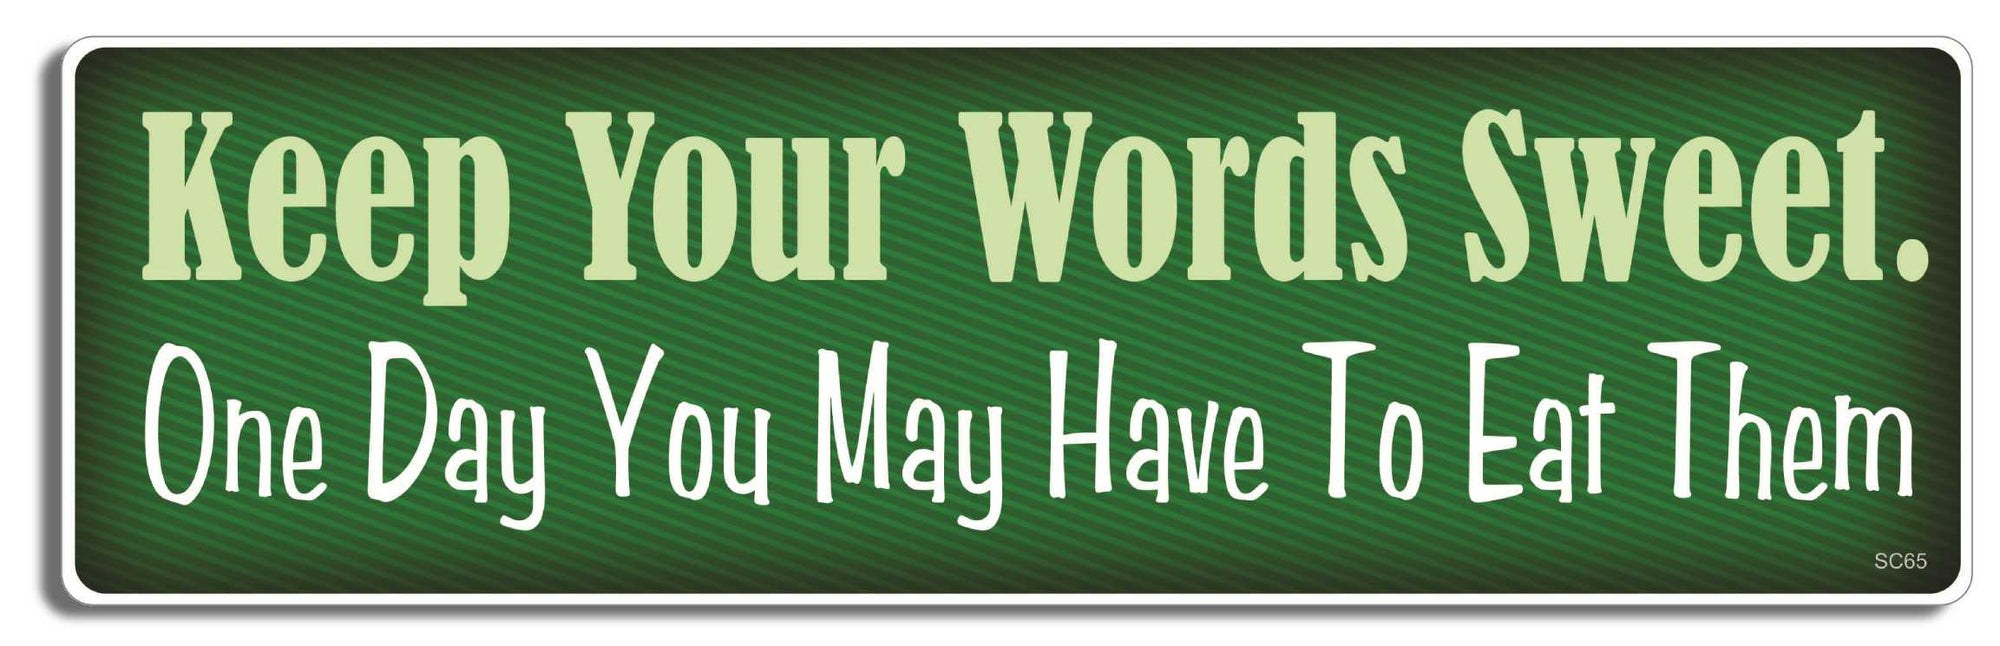 Keep your words sweet, one day you may have to eat them - 3" x 10" Bumper Sticker--Car Magnet- -  Decal Bumper Sticker-political Bumper Sticker Car Magnet Keep your words sweet, one day you-  Decal for carsconservative, liberal, Political